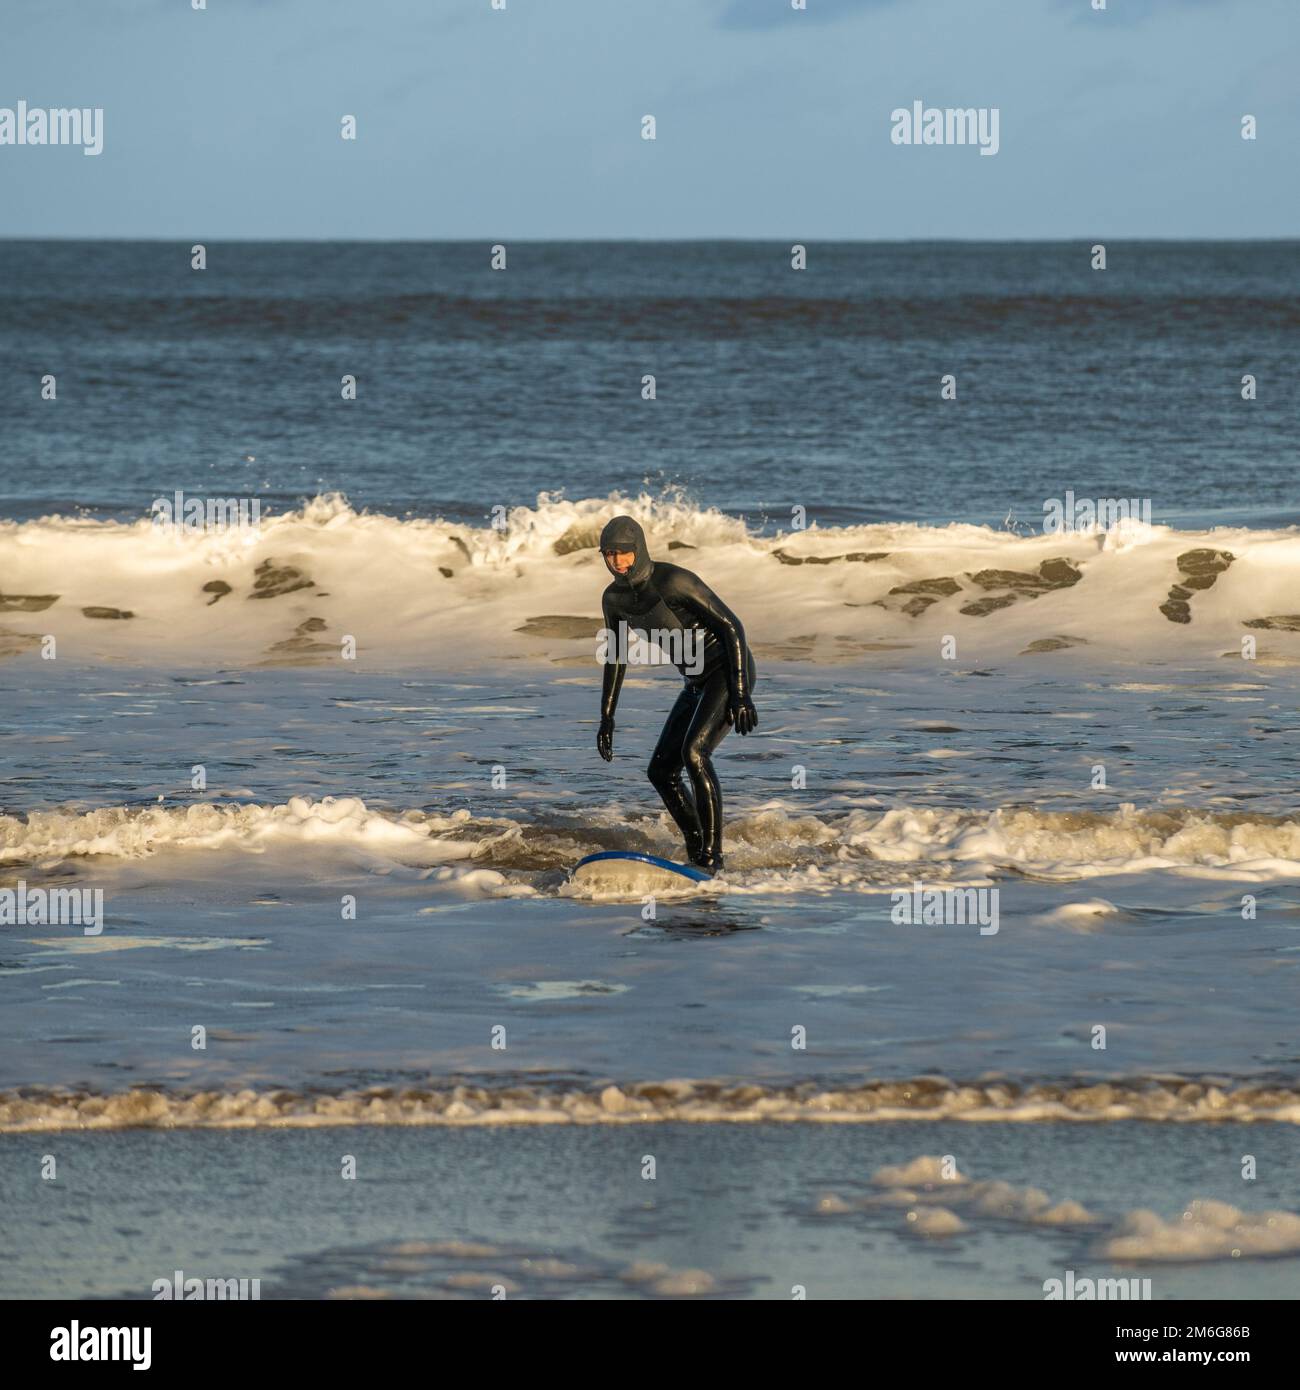 Caucasian male surfer wearing a black wetsuit standing on a surfboard coming onshore at Cayton Bay, North Yorkshire, UK Stock Photo